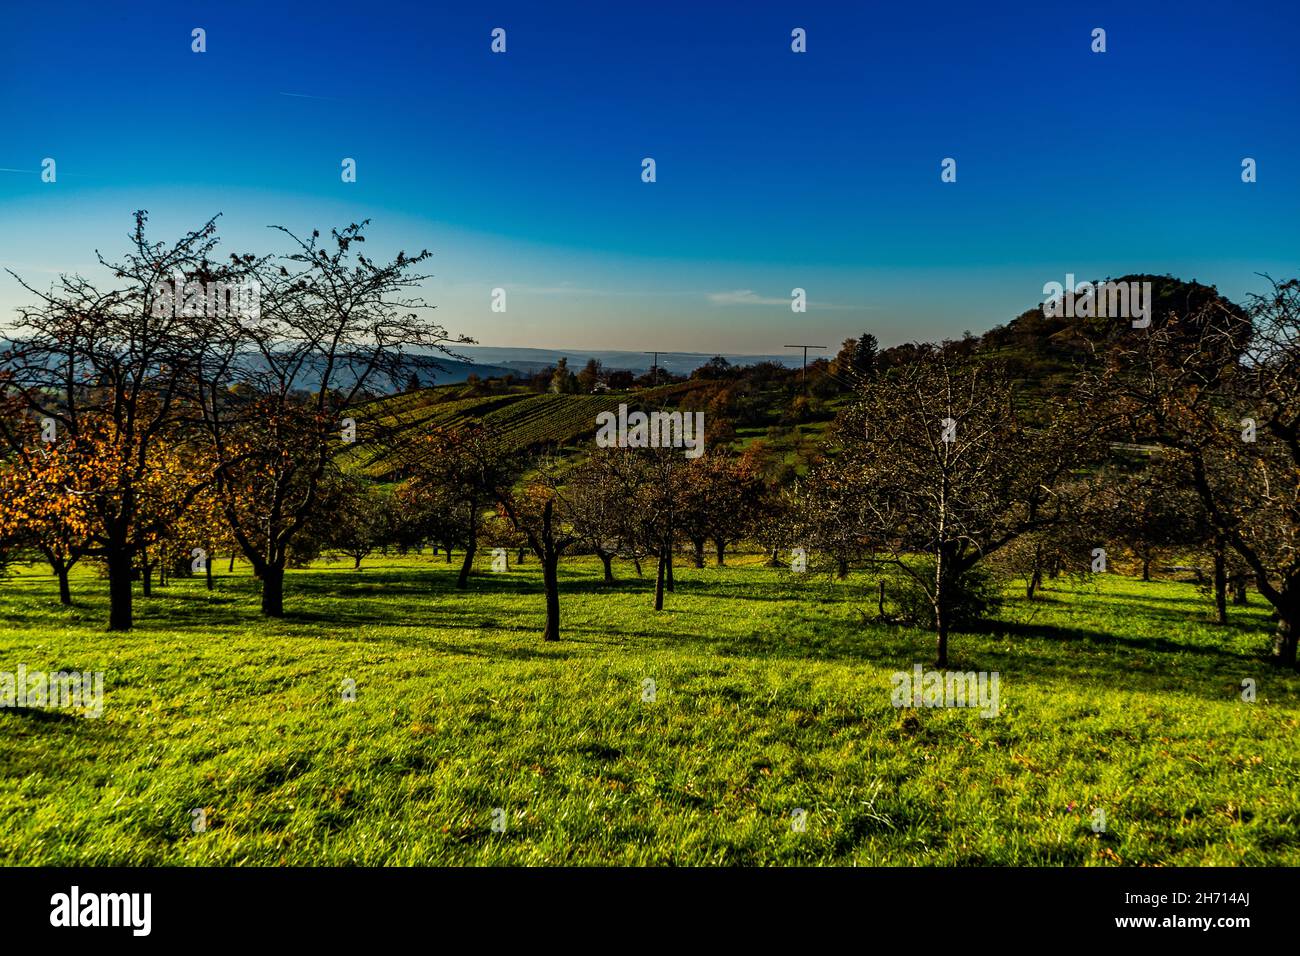 View of an orchard in autumn with blue skies Stock Photo